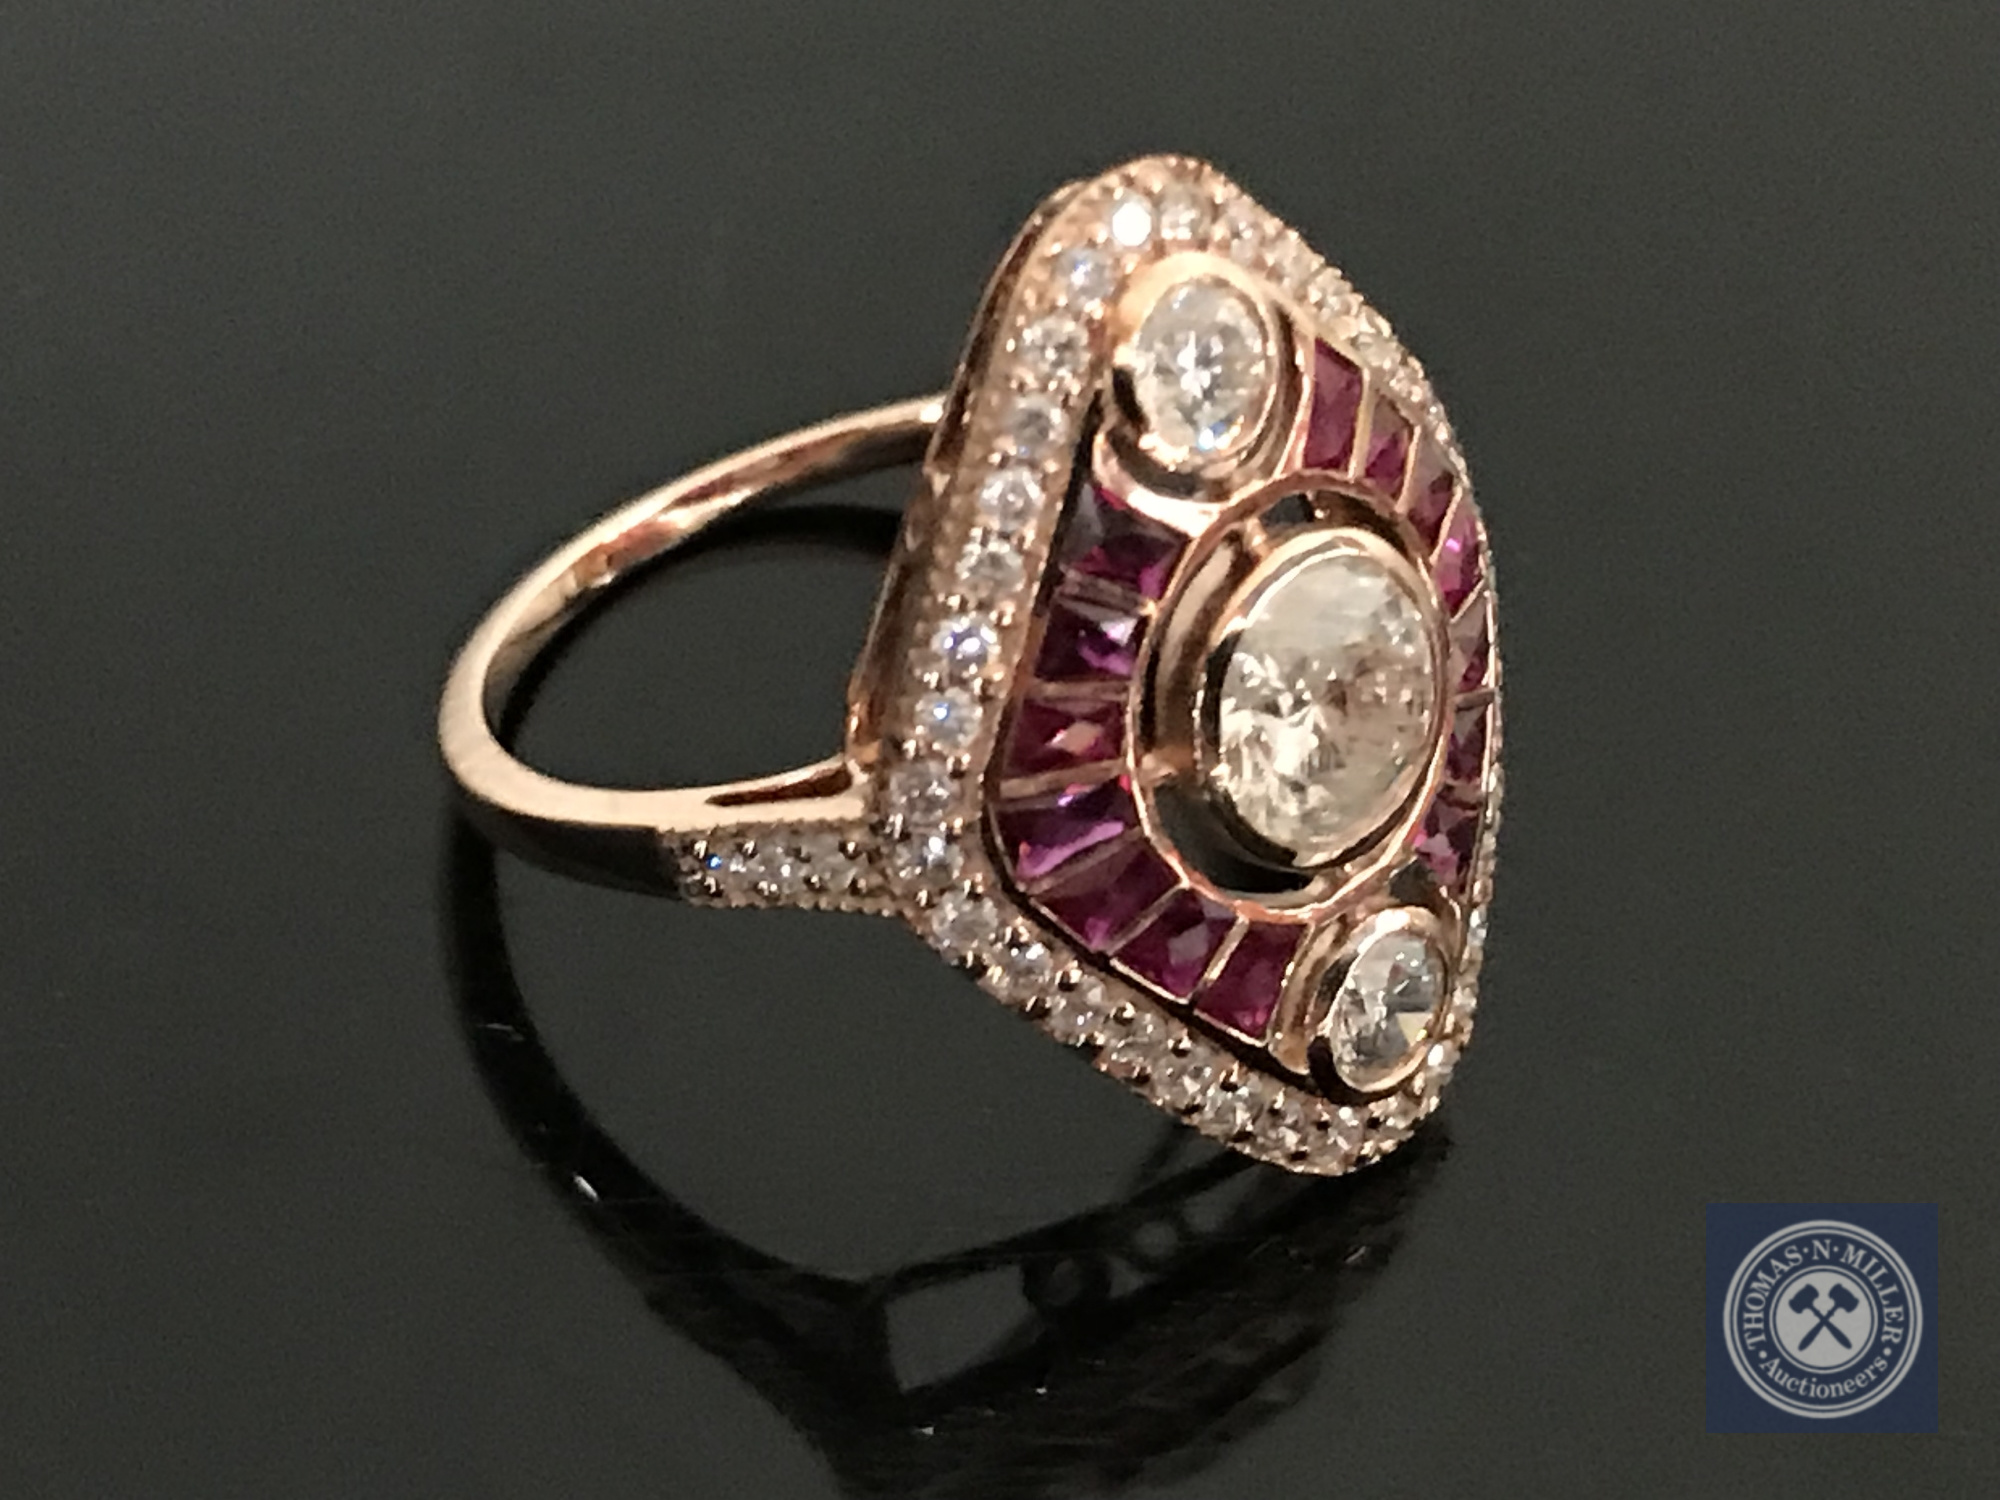 A 14ct rose gold ruby and diamond ring, featuring 1 round brilliant cut diamond 0.